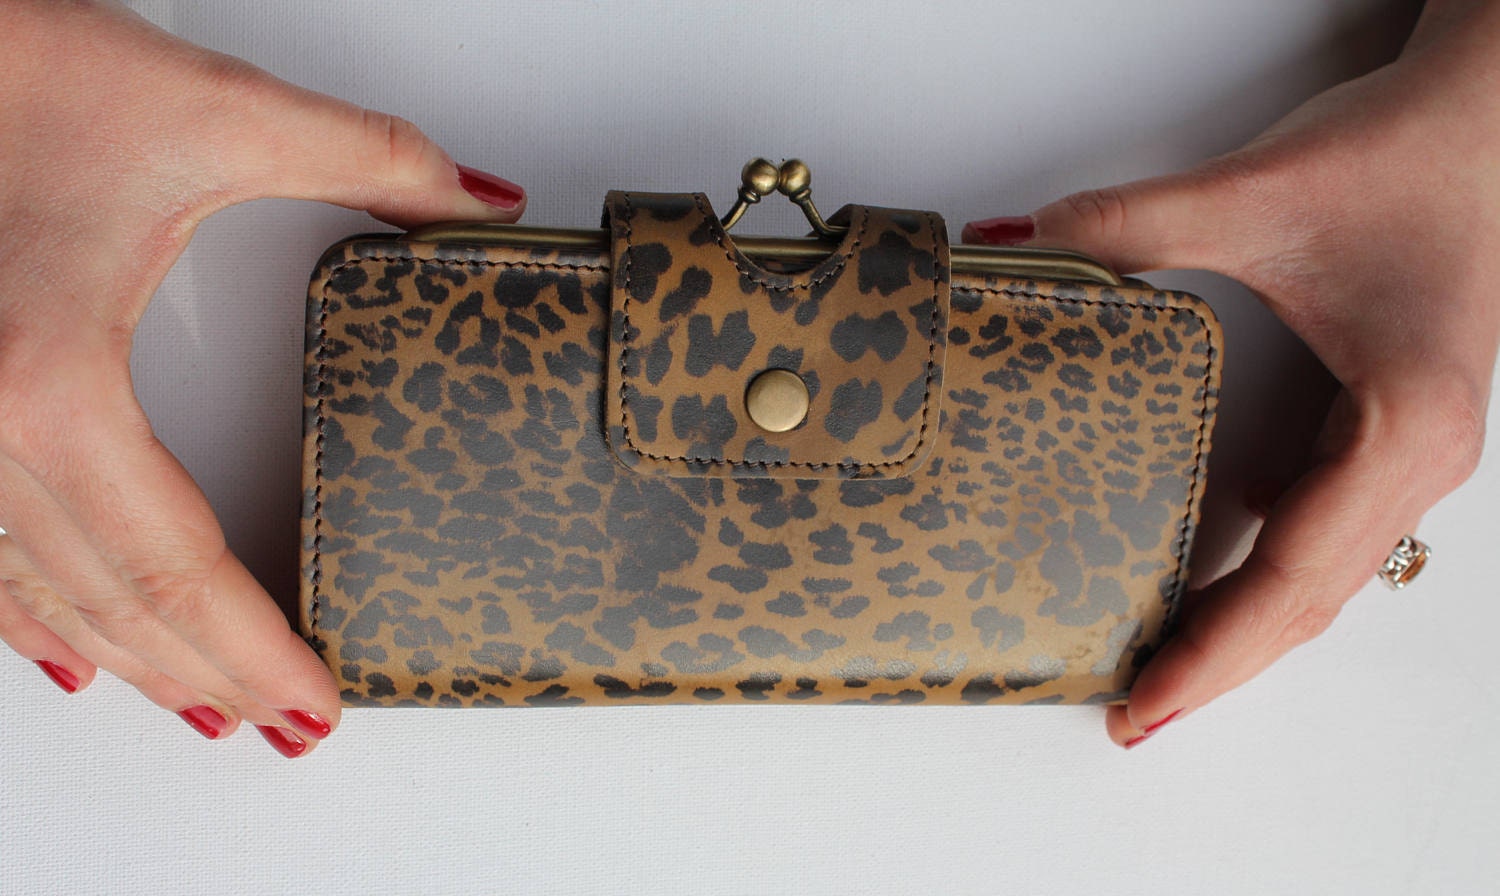 Large Clip Wallet Leopard Print Leather, Evanna Kiss Lock Wallet, Clutch Style Clasp Wallet, Internal Ball Lock Purse, Note and Card Spaces